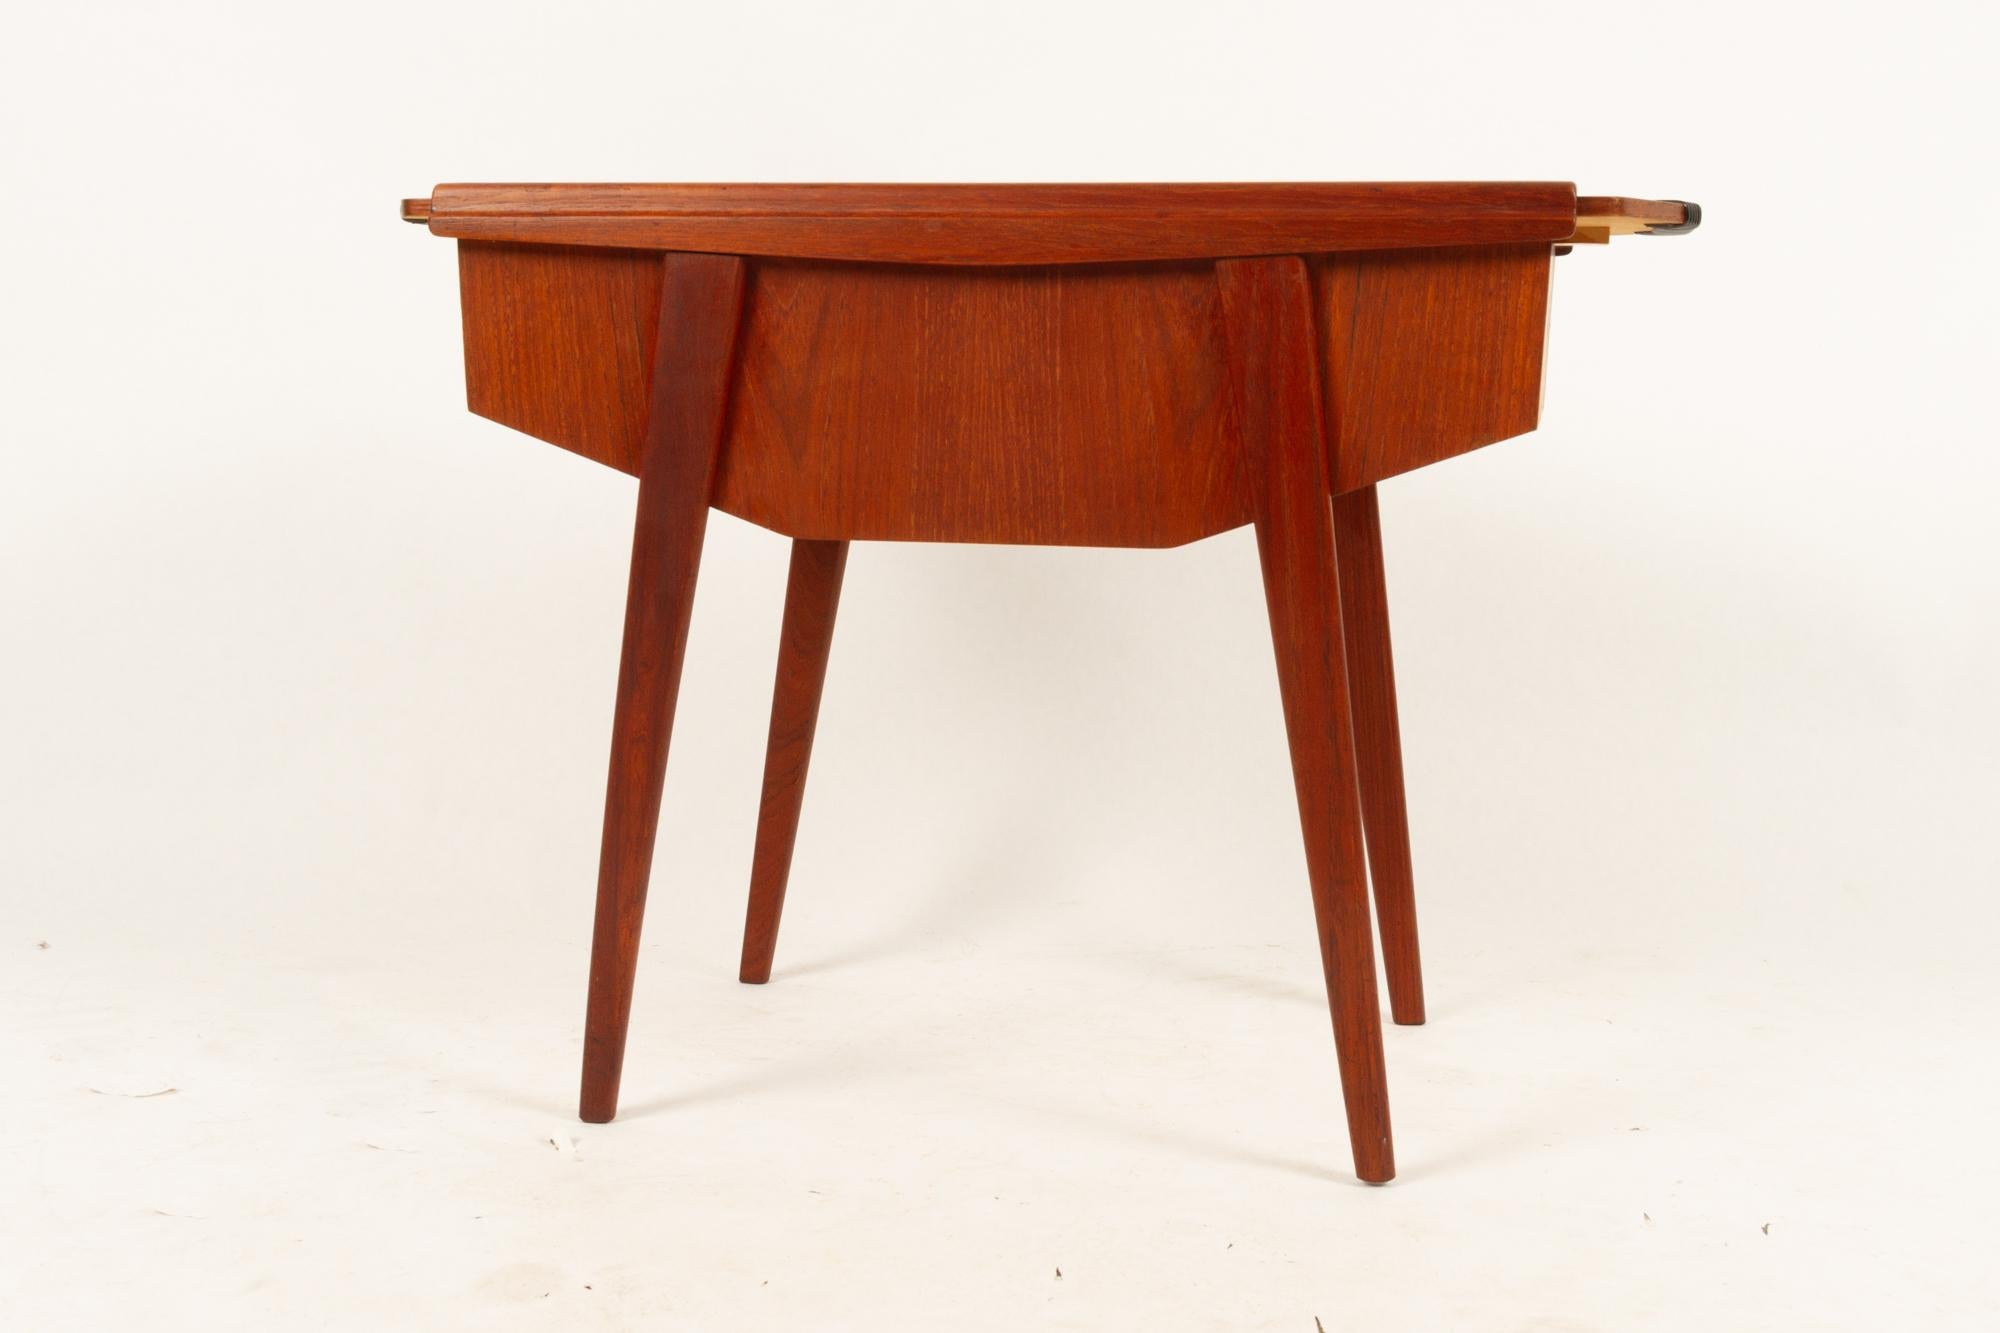 Danish teak sewing table, 1950s
Danish Mid-Century Modern sewing box in teak. Tabletop slides away to reveal large compartment and removable sliding tray. Sloped and rounded legs in solid teak
Very good vintage condition. Cleaned, oiled and